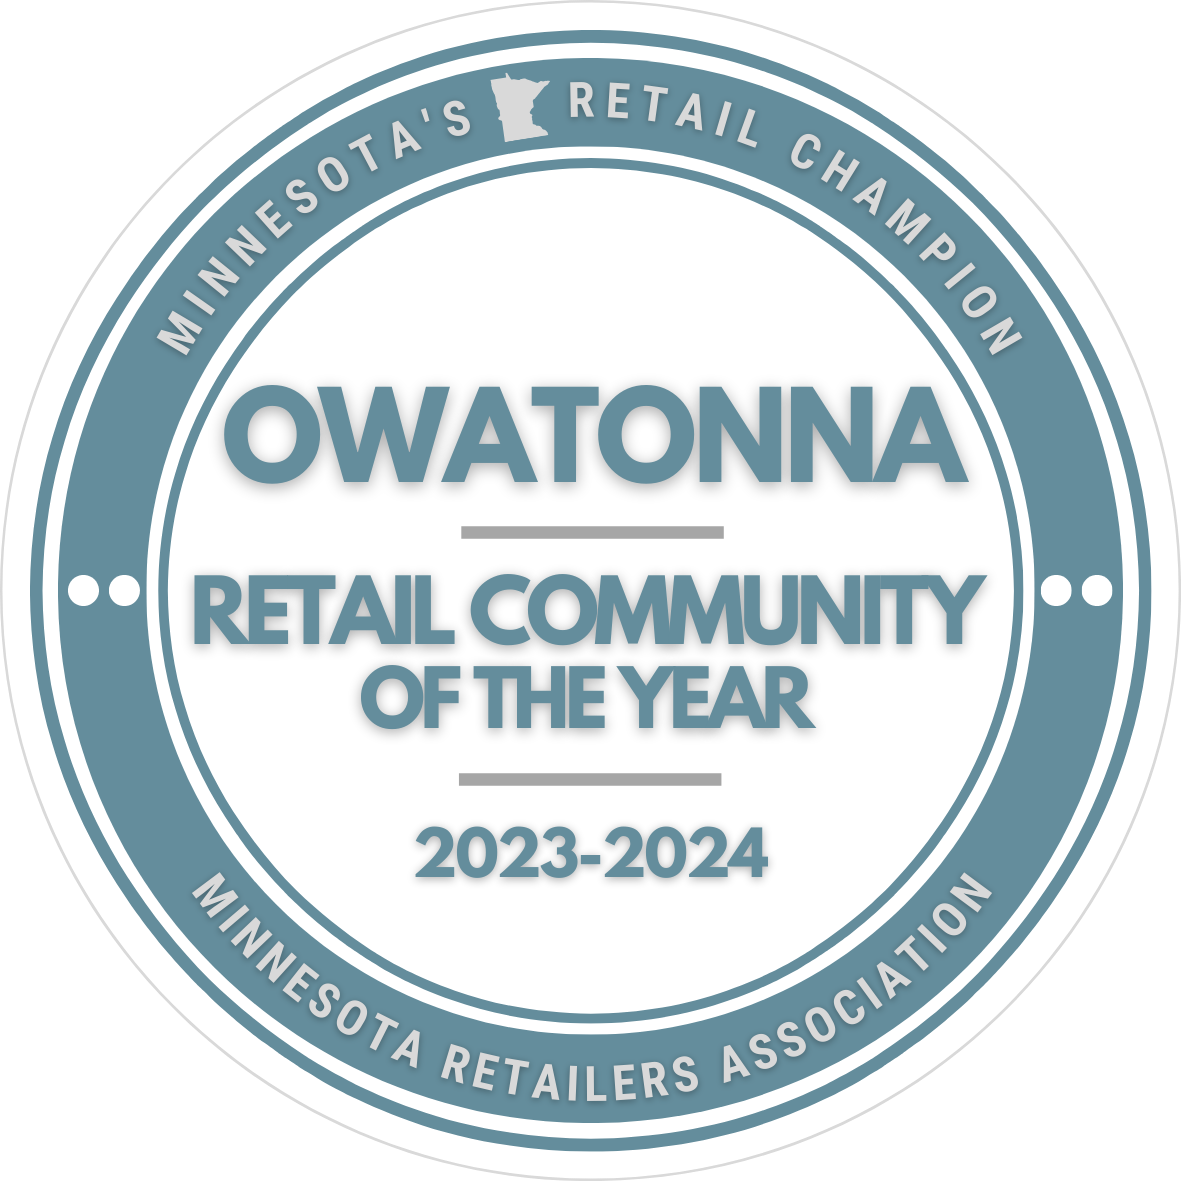 Owatonna Retail Community Of The Year